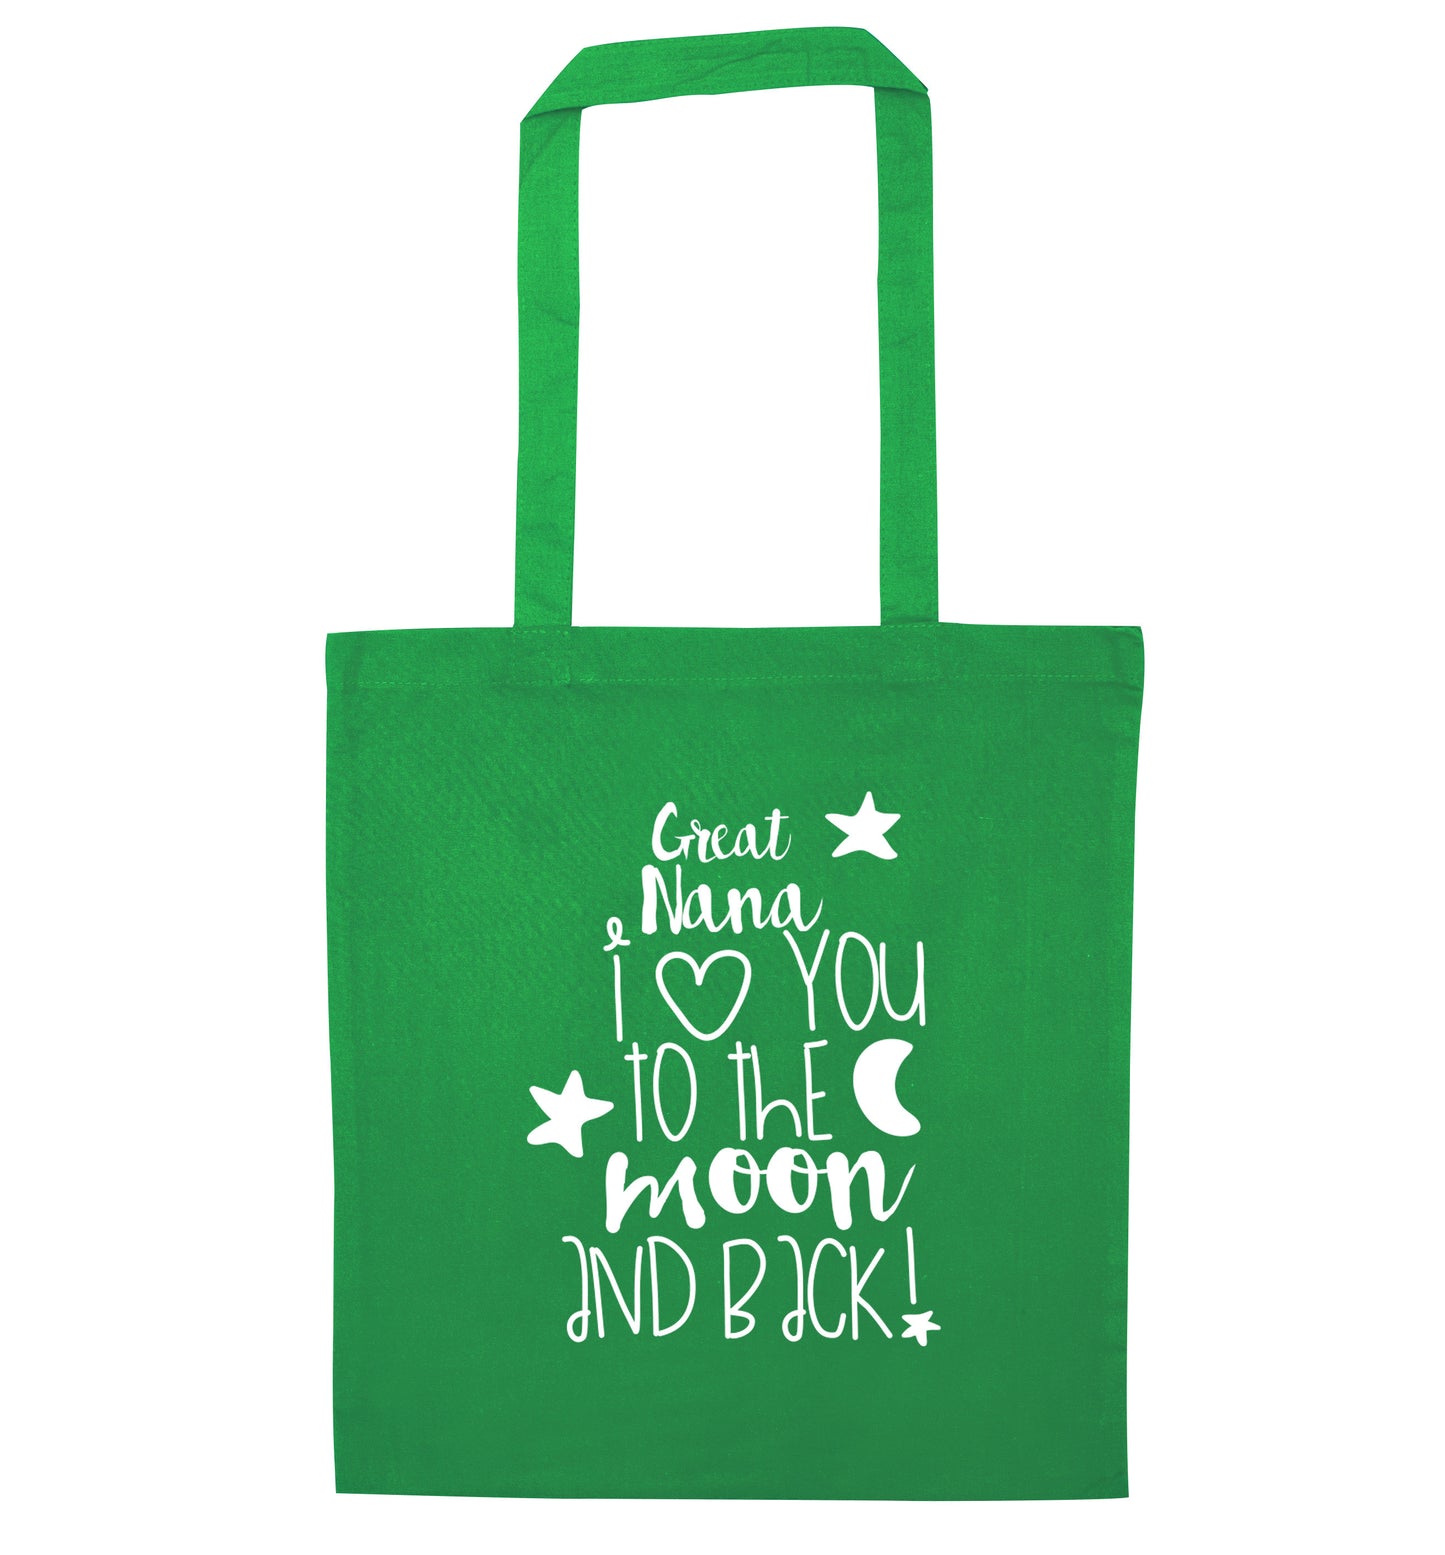 Great Nana I love you to the moon and back green tote bag